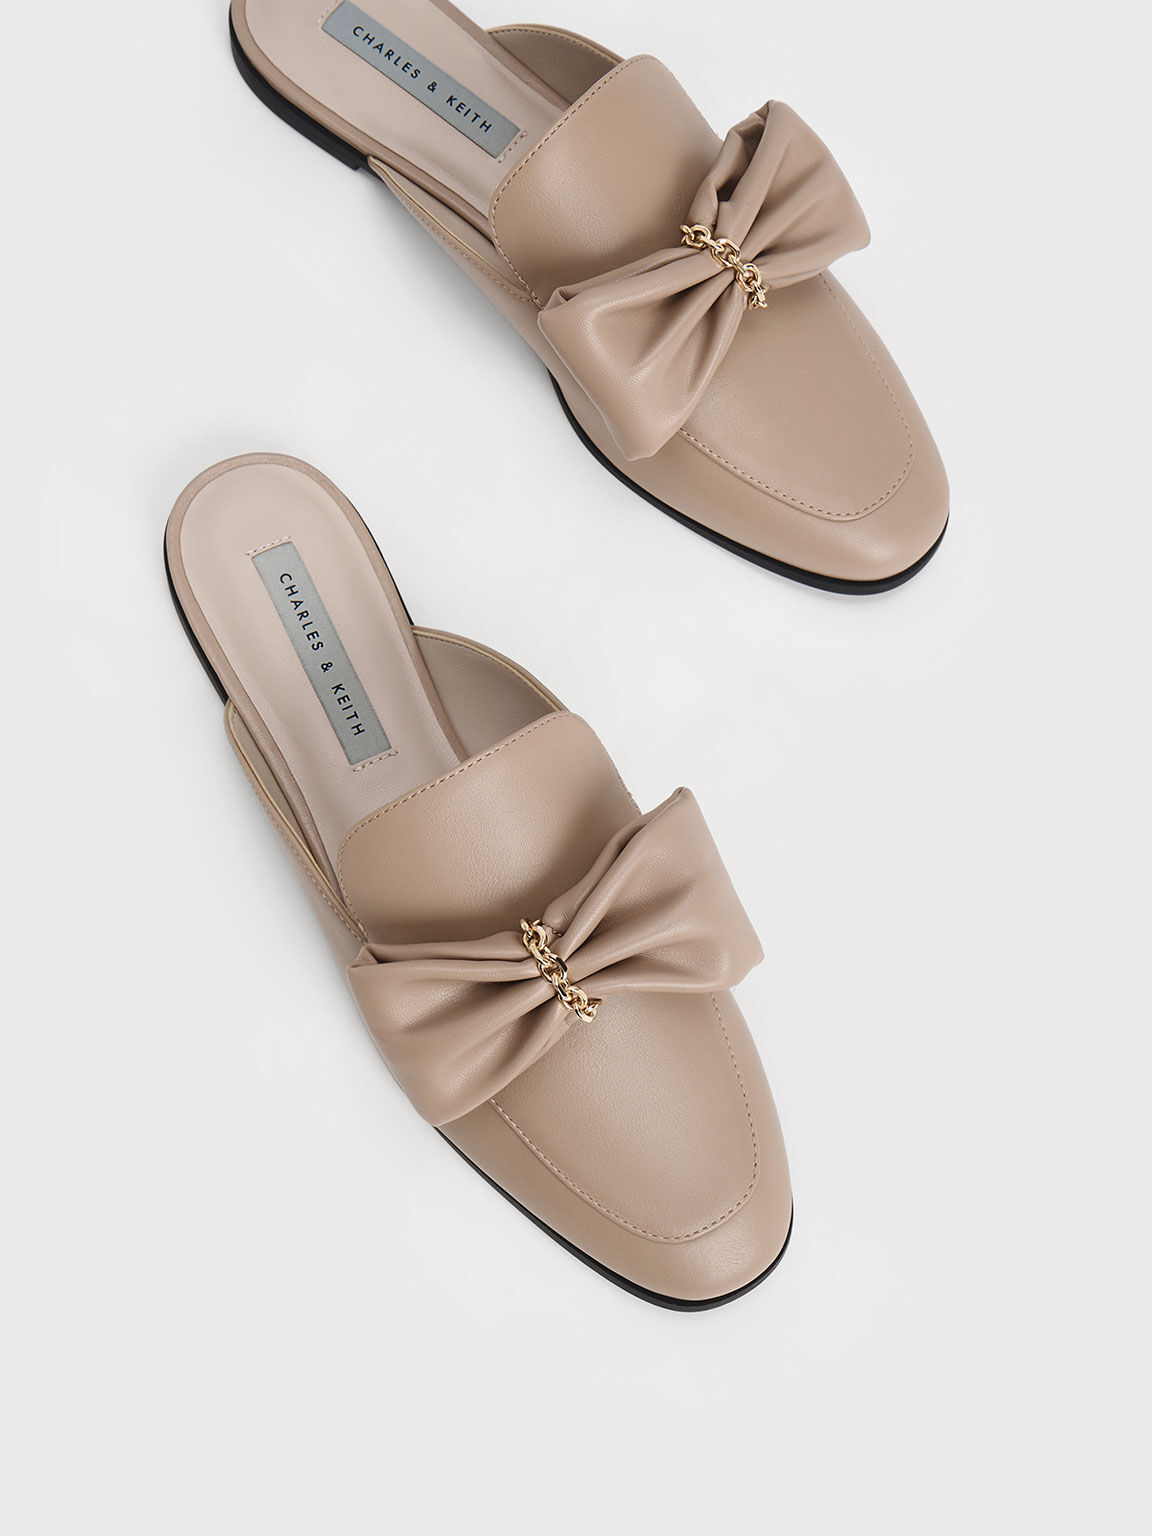 Chain-Link Bow Loafer Mules, Beige, hi-res